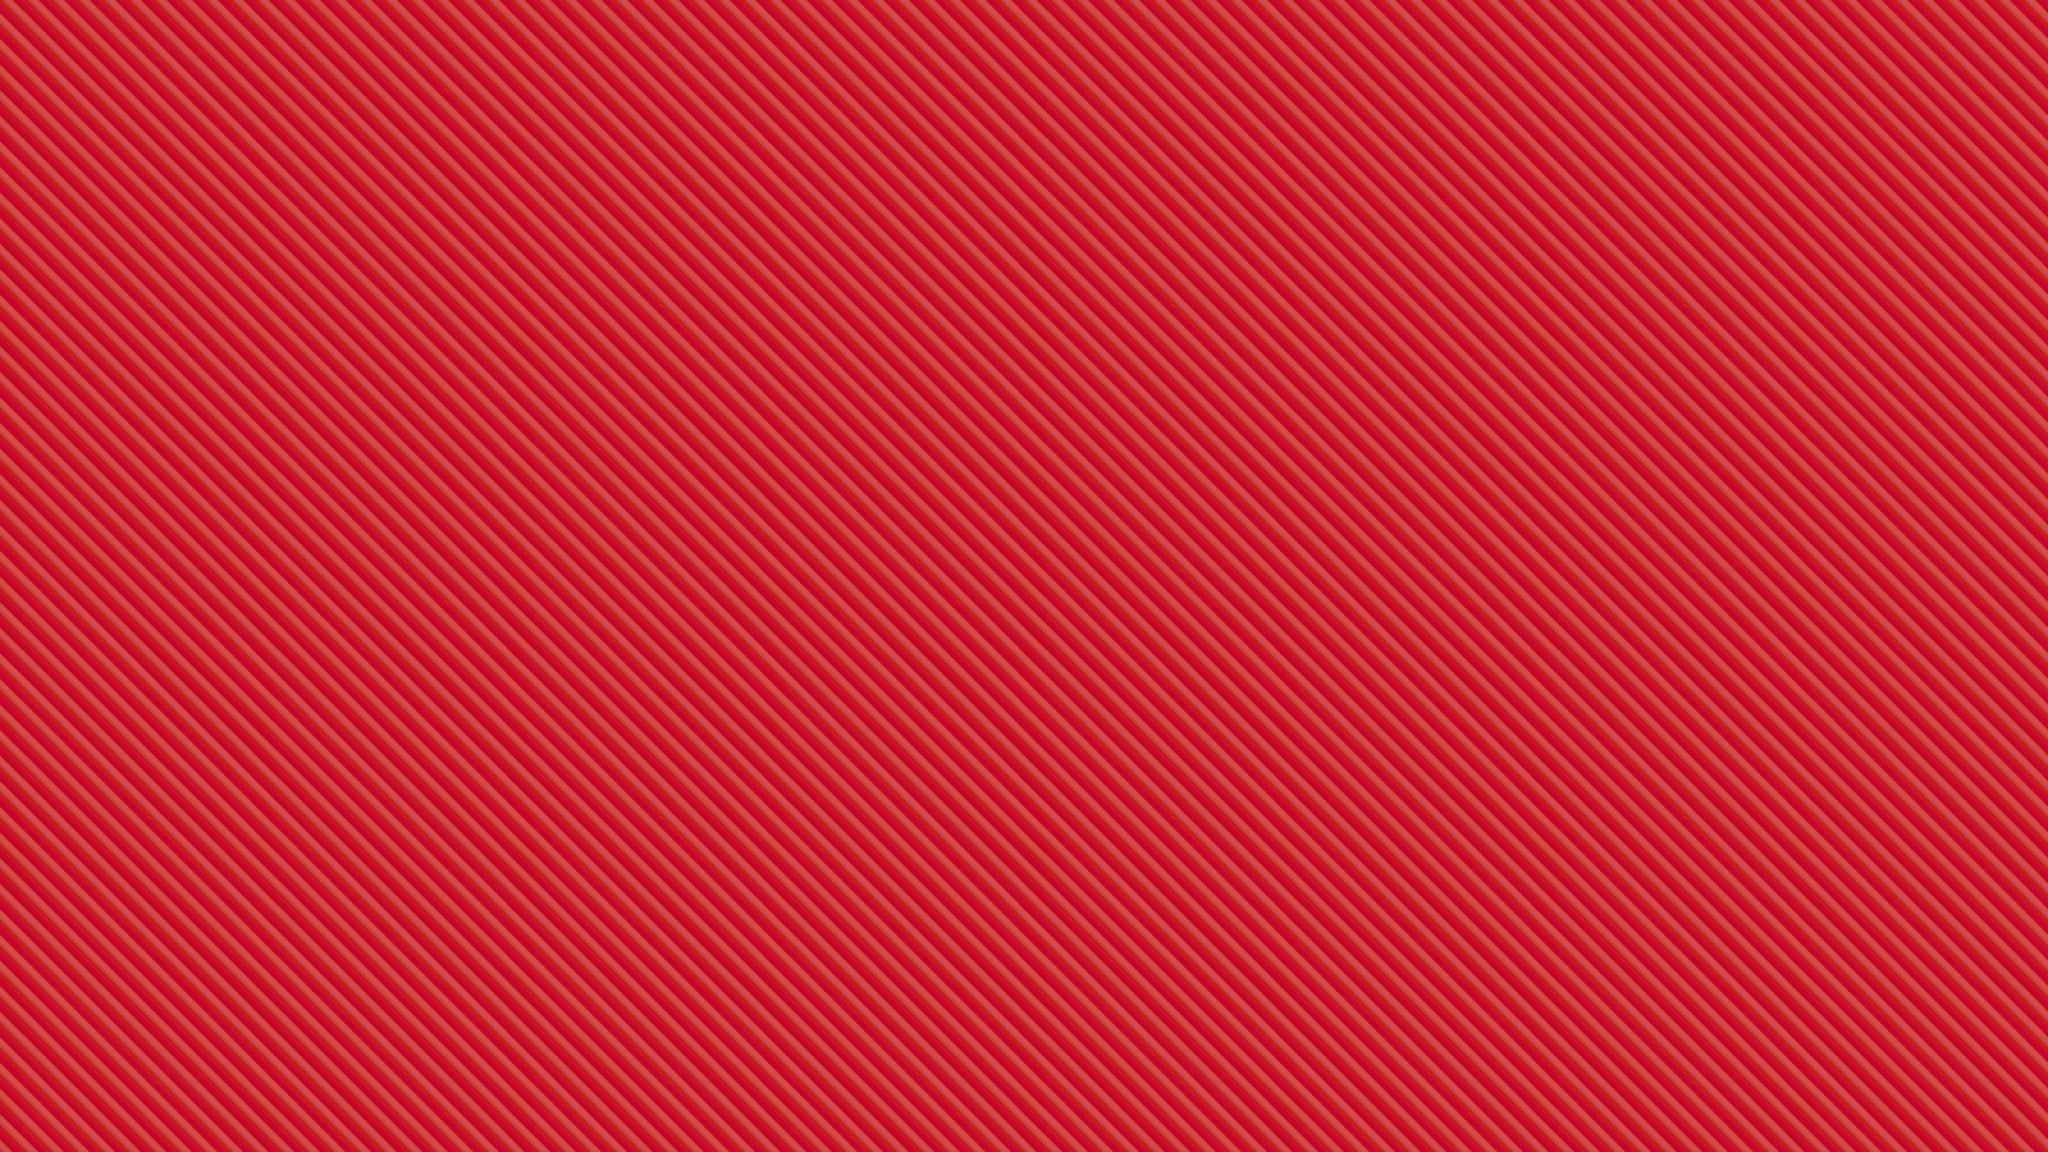 A red background with a diagonal striped pattern. - Light red